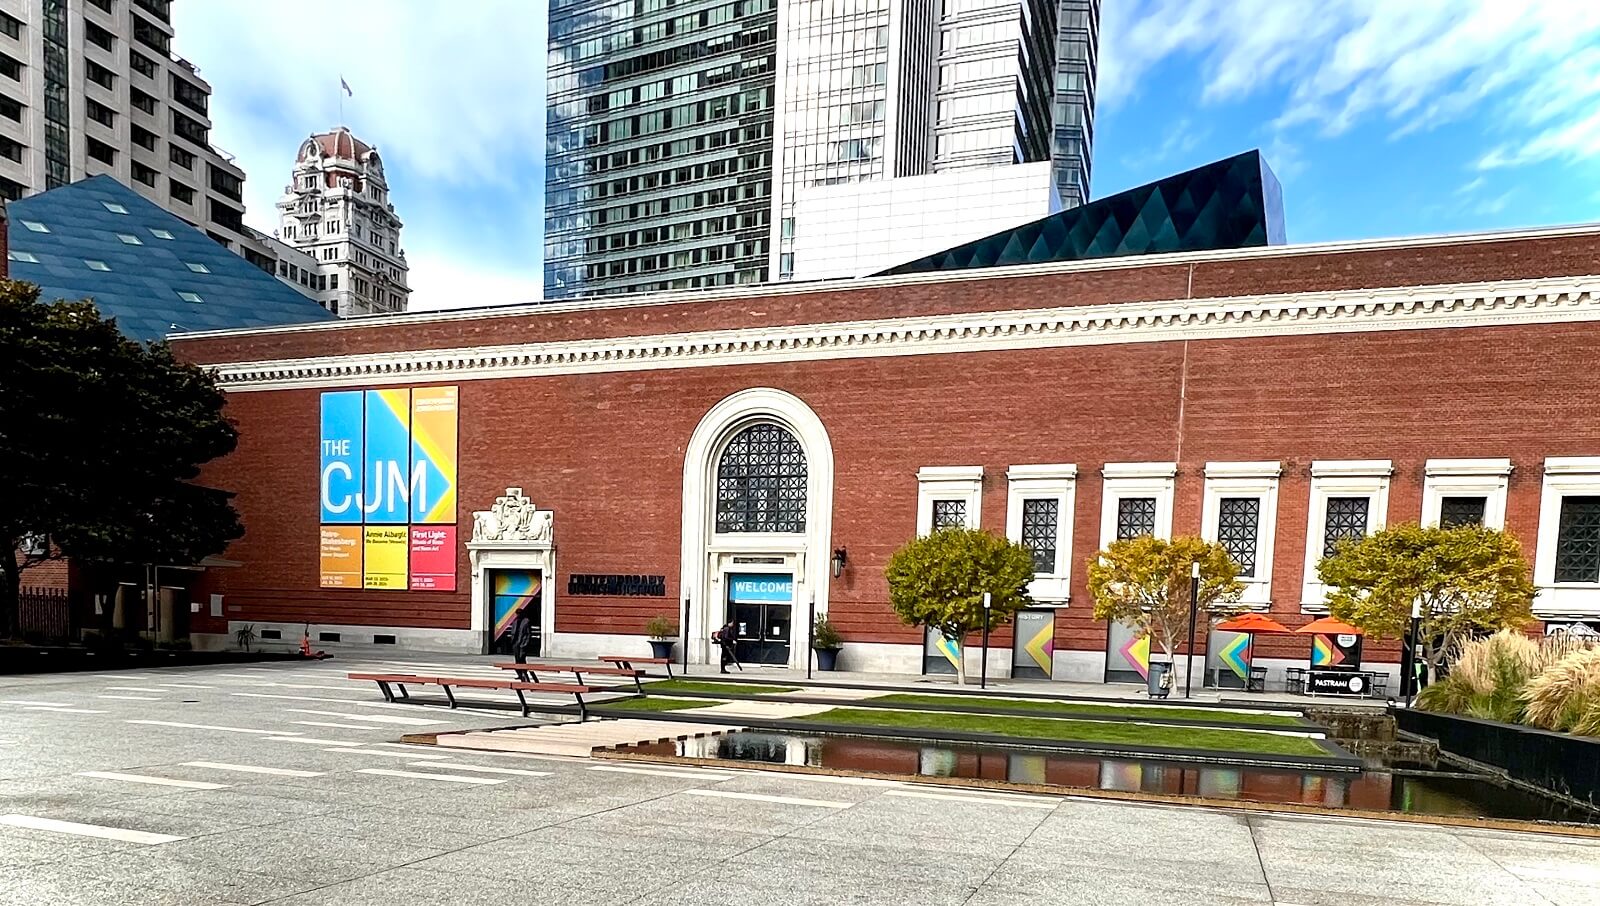 Guide to the Contemporary Jewish Museum (CJM)